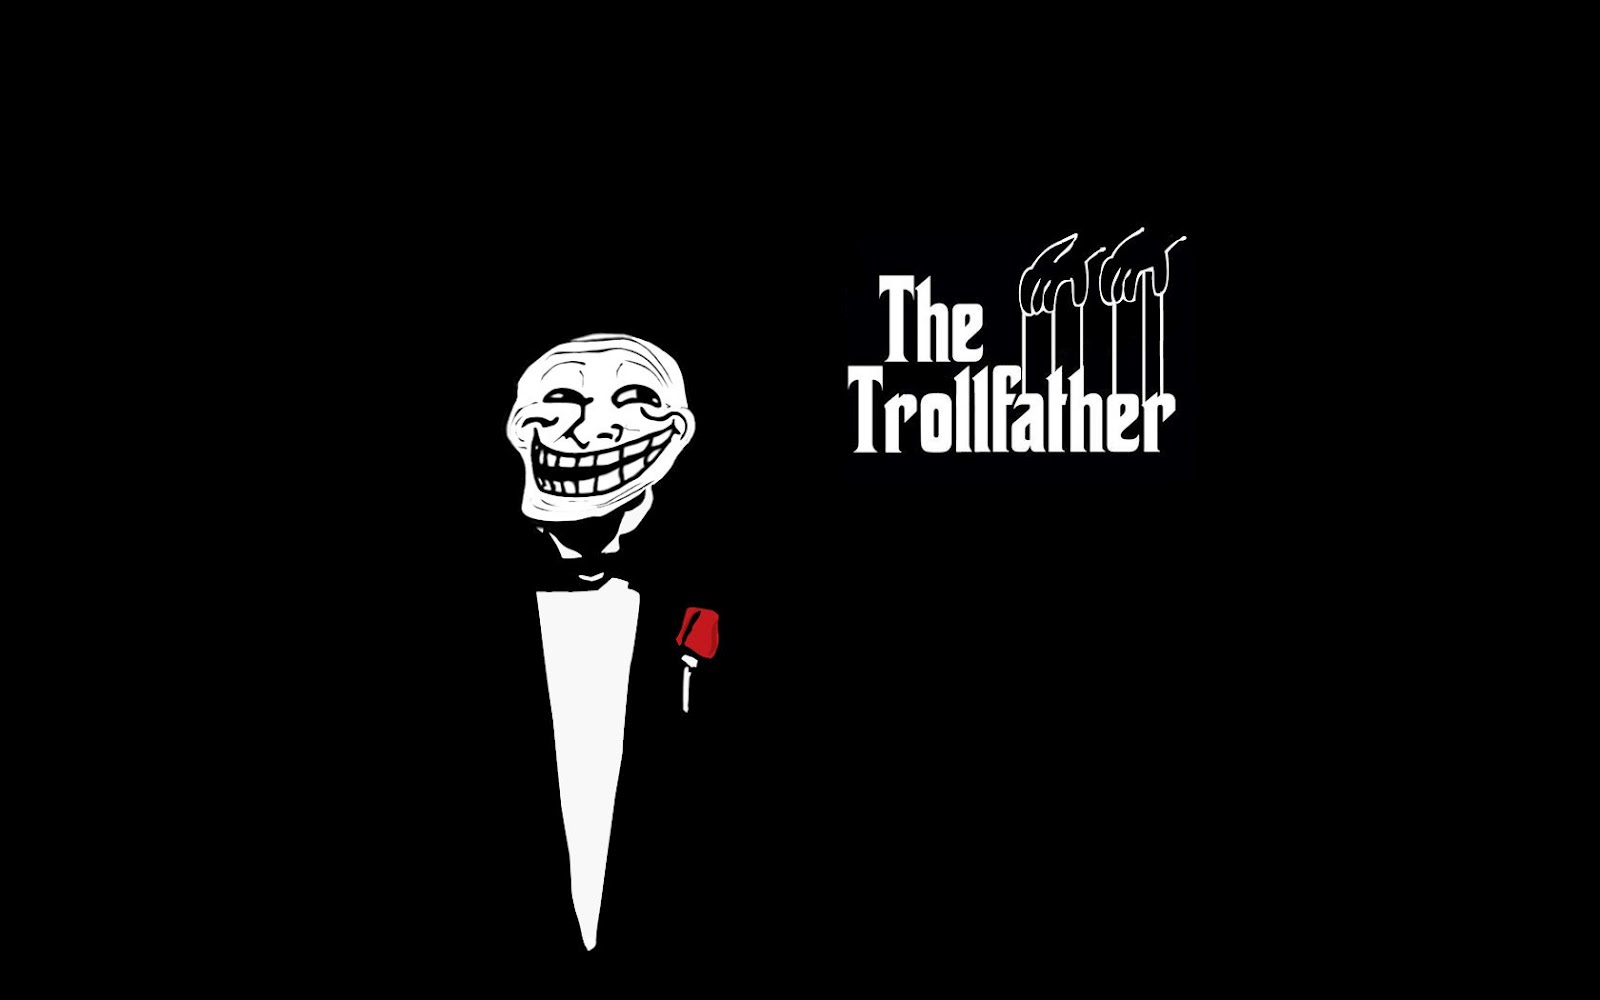 Funny Trollface Meme HD Wallpapers Download Wallpapers in HD for 1600x1000